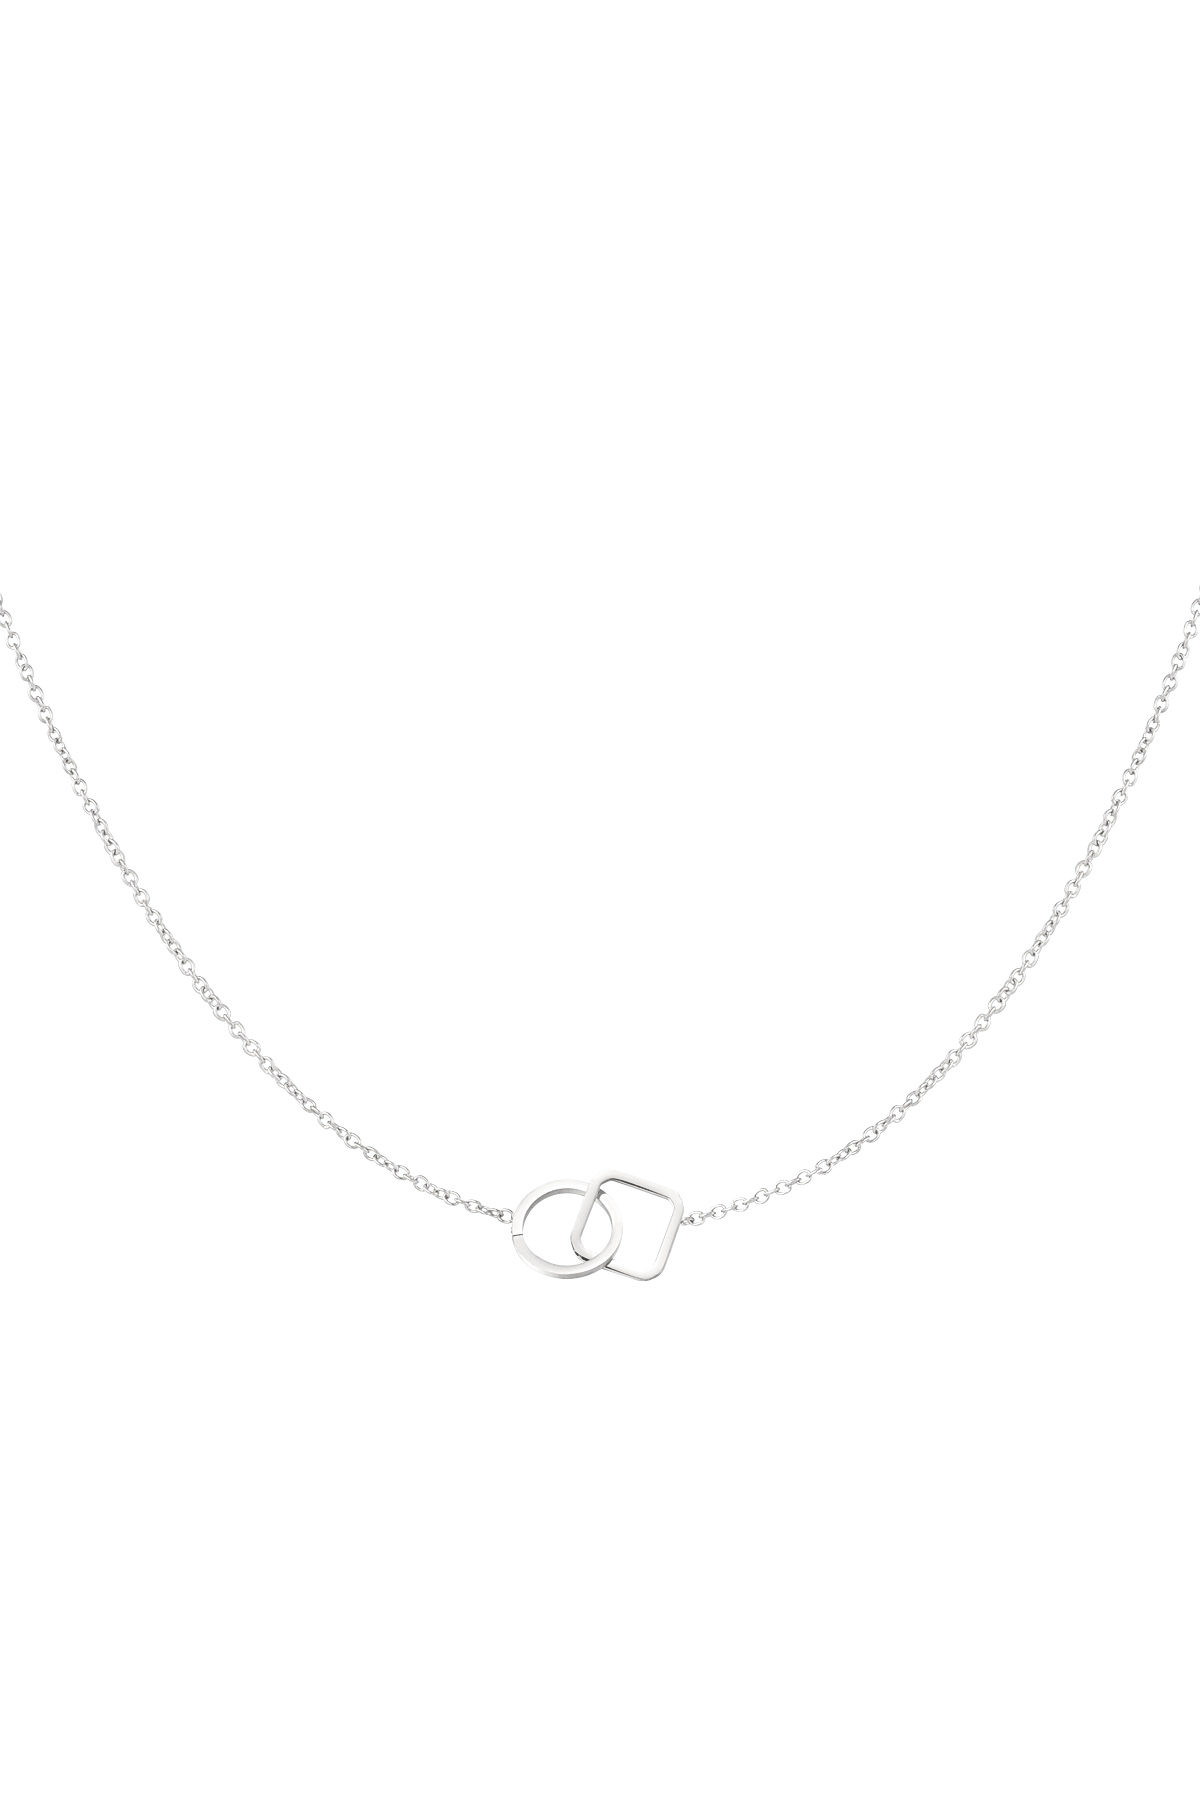 Chain connected square & round - silver 